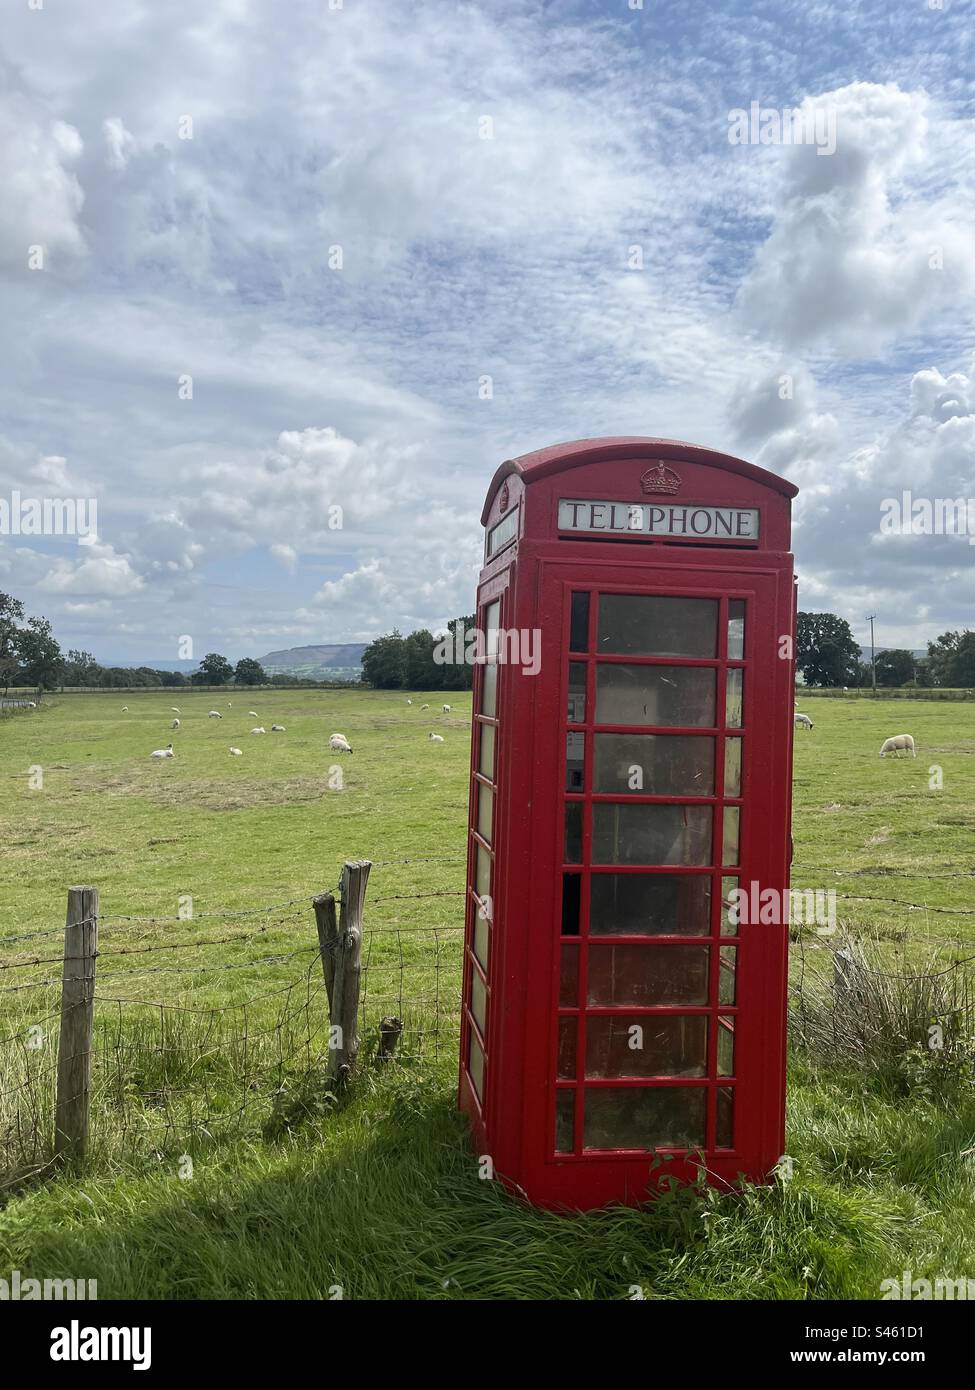 Telephone box in the countryside Stock Photo